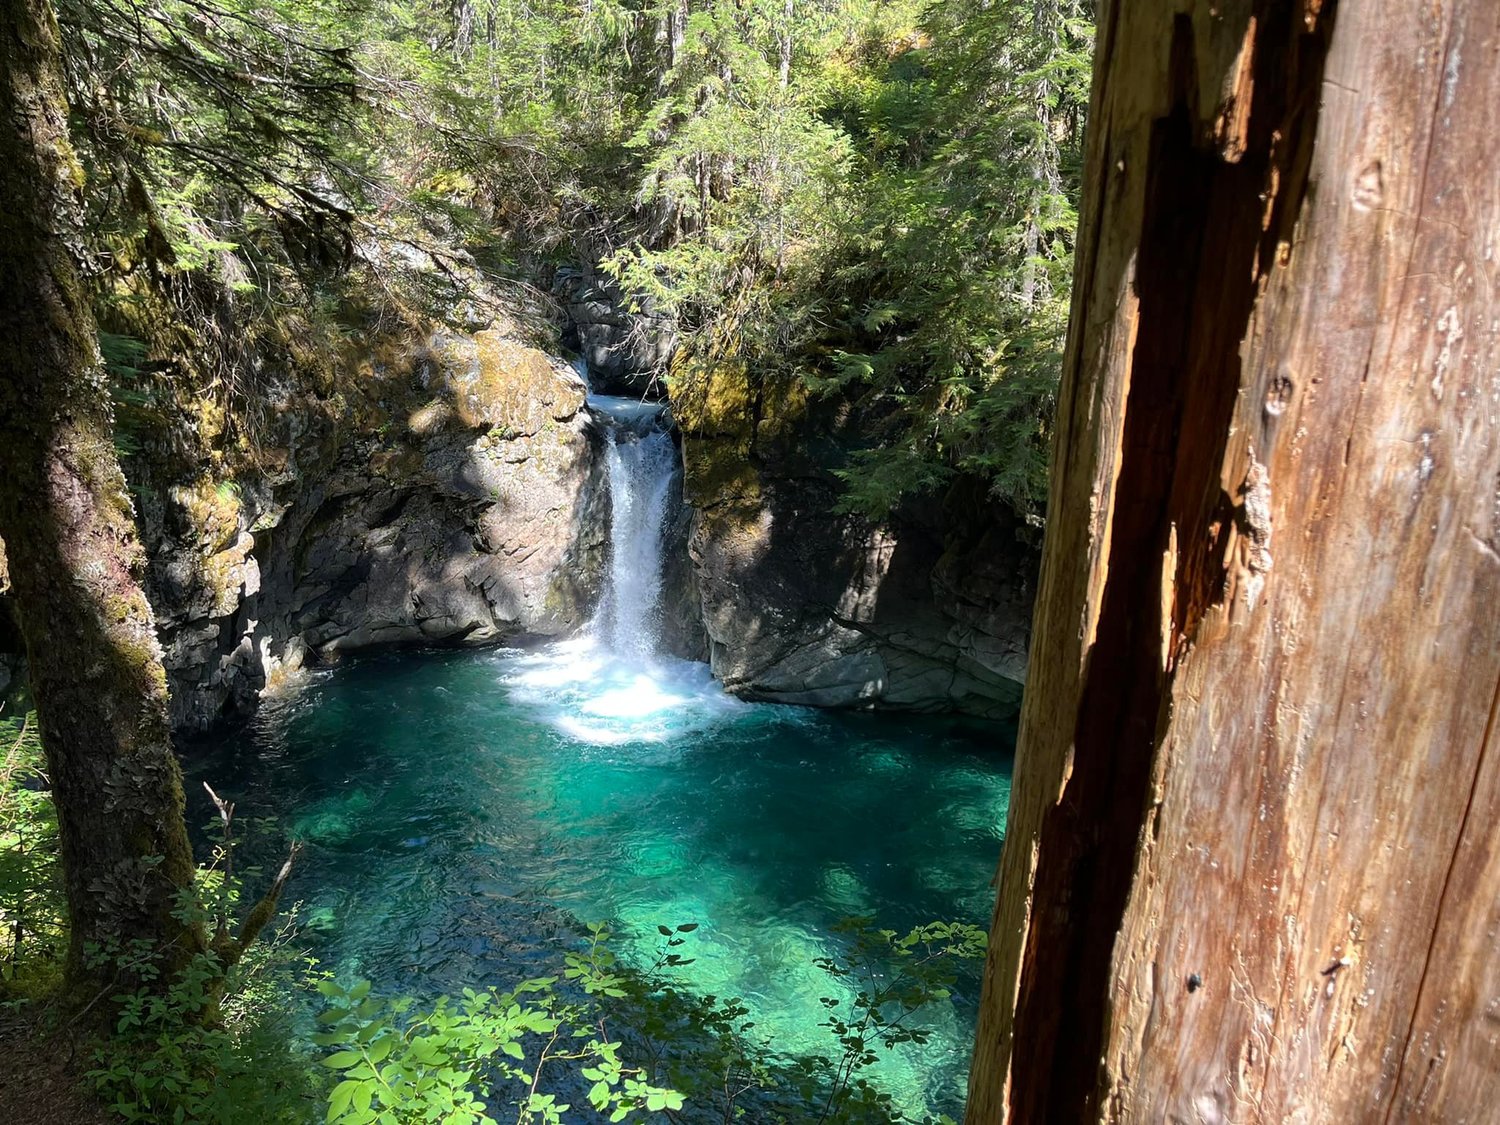 Chehalis resident Brian Zylstra captured these images during a weekend trip to Stafford Falls. These photographs were taken from near the Eastside Trail in Mount Rainier National Park on Sunday, Aug. 21.